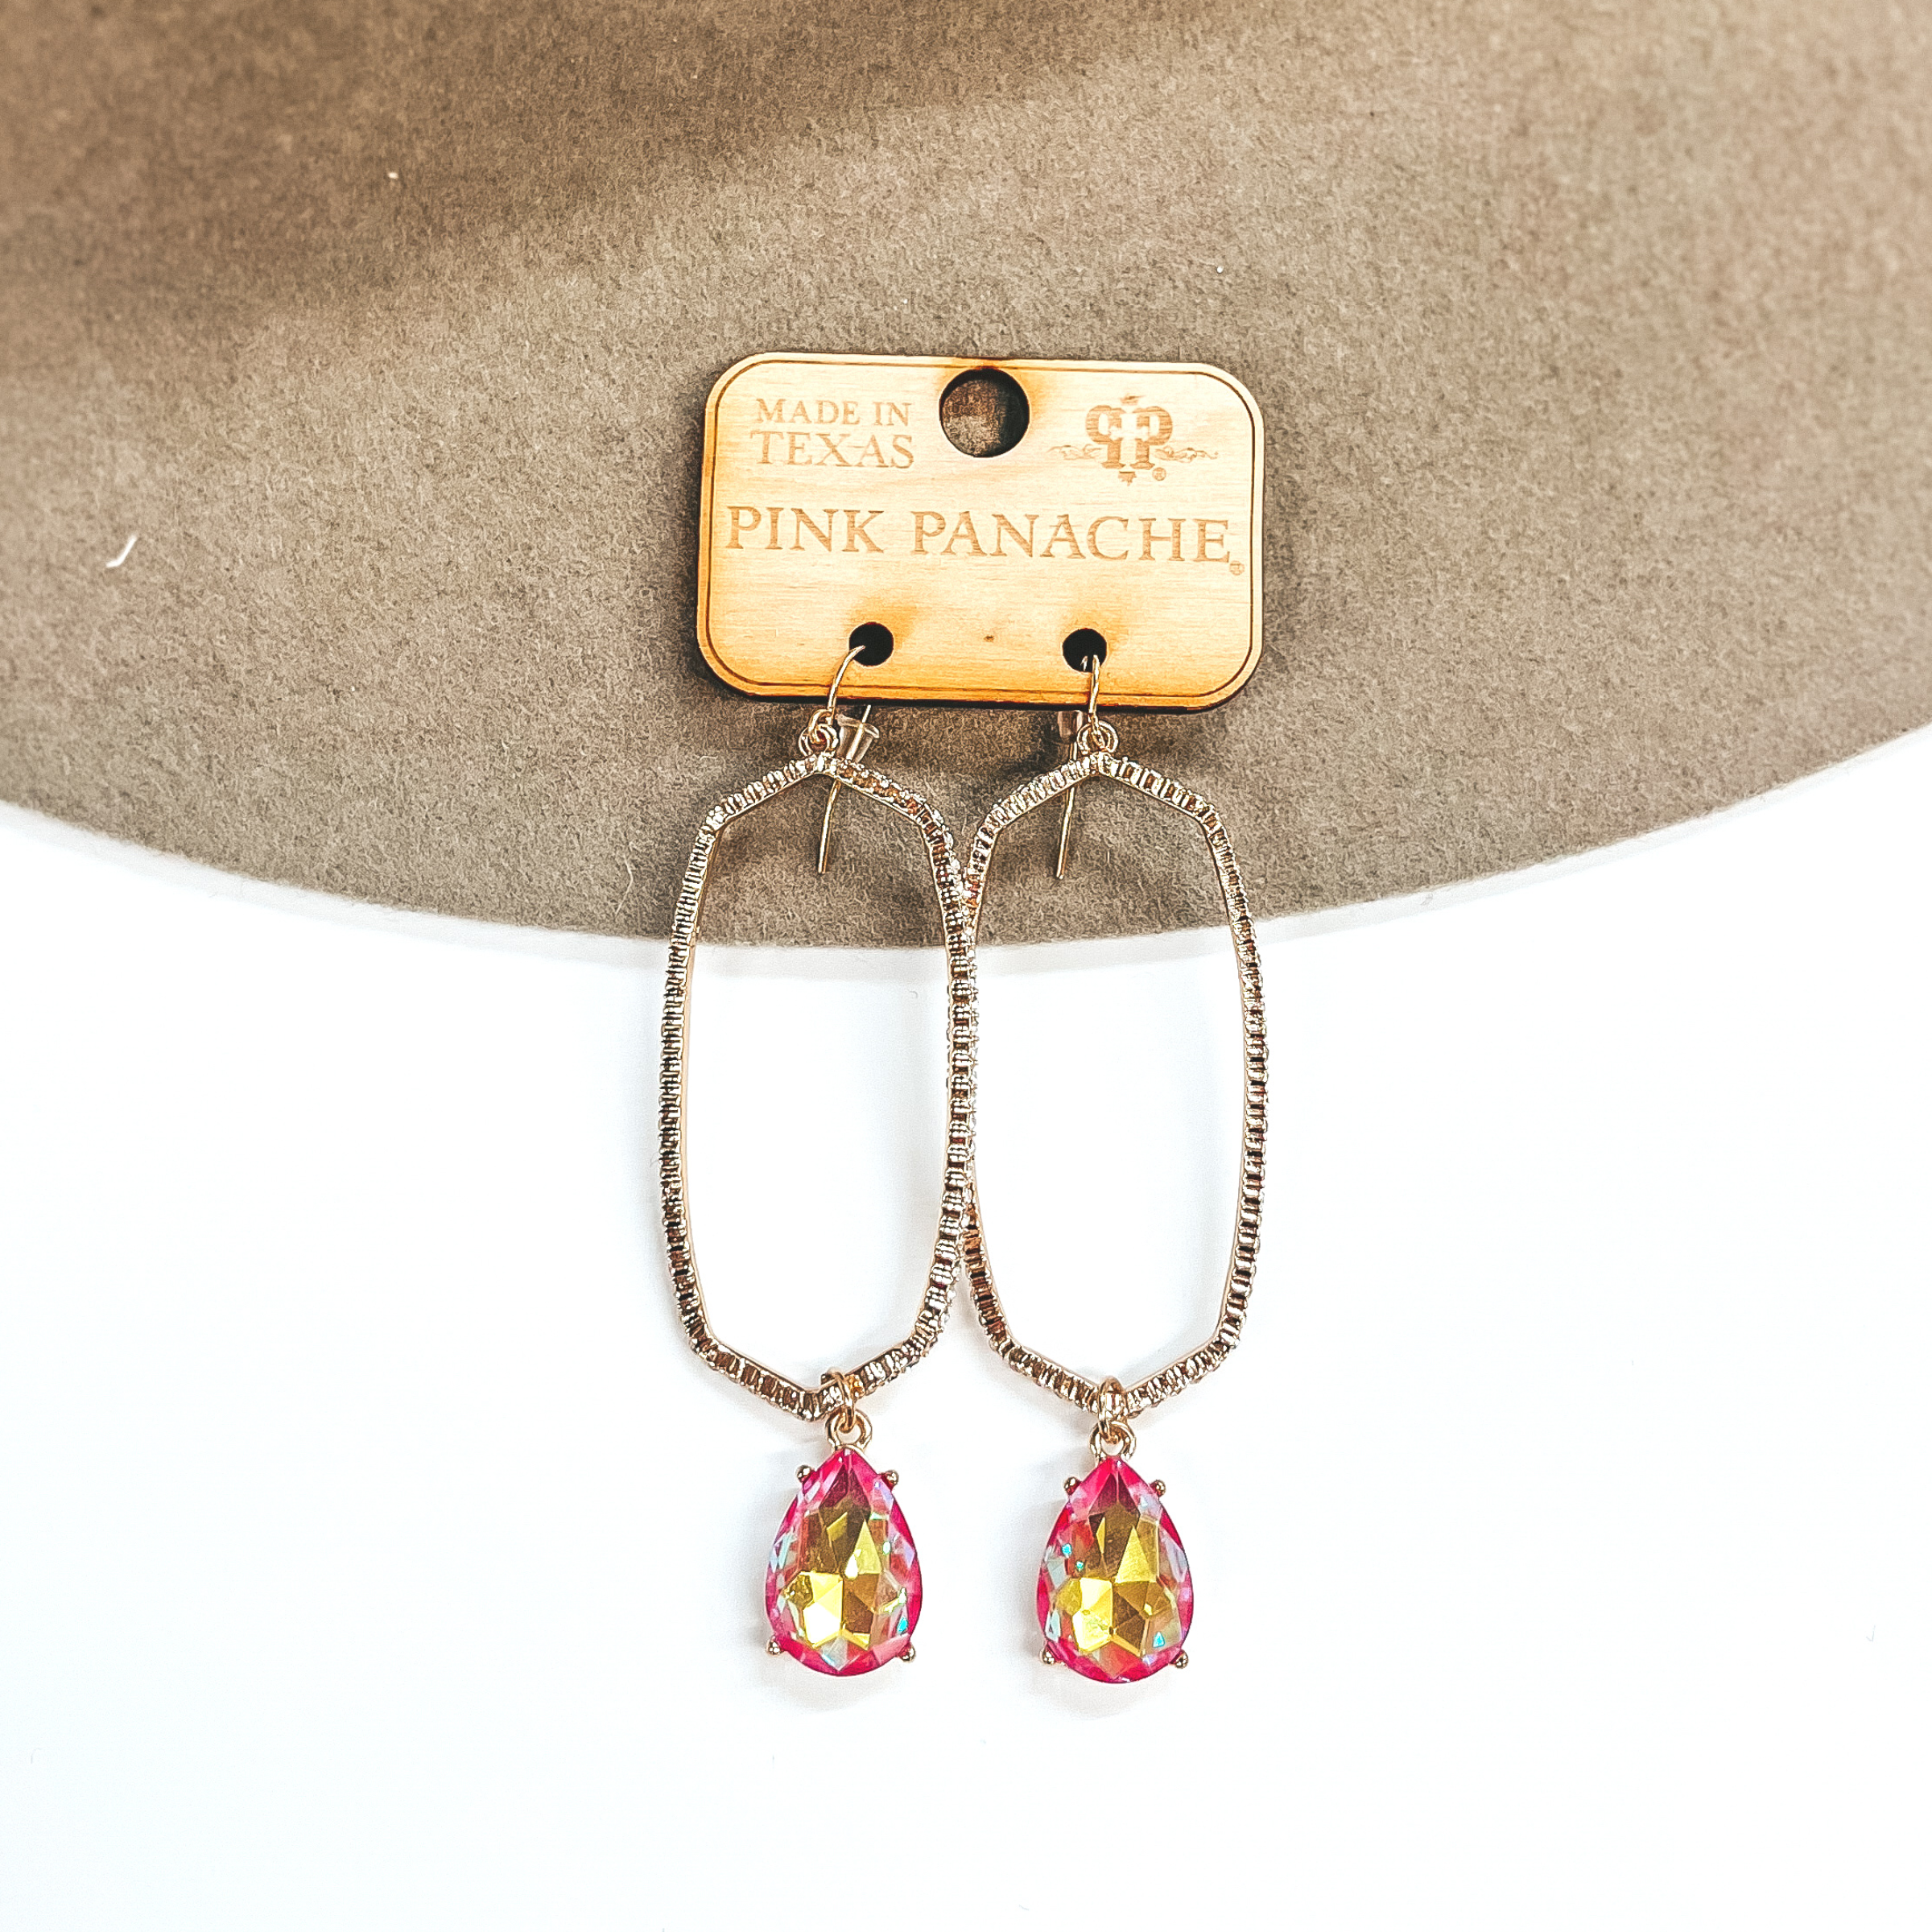 A pair of oval outline earrings that have crystals all the way around. These earrings have a coral AB crystal teardrop pendant at the bottom of each earring. Pictured on white background with a beige hat.